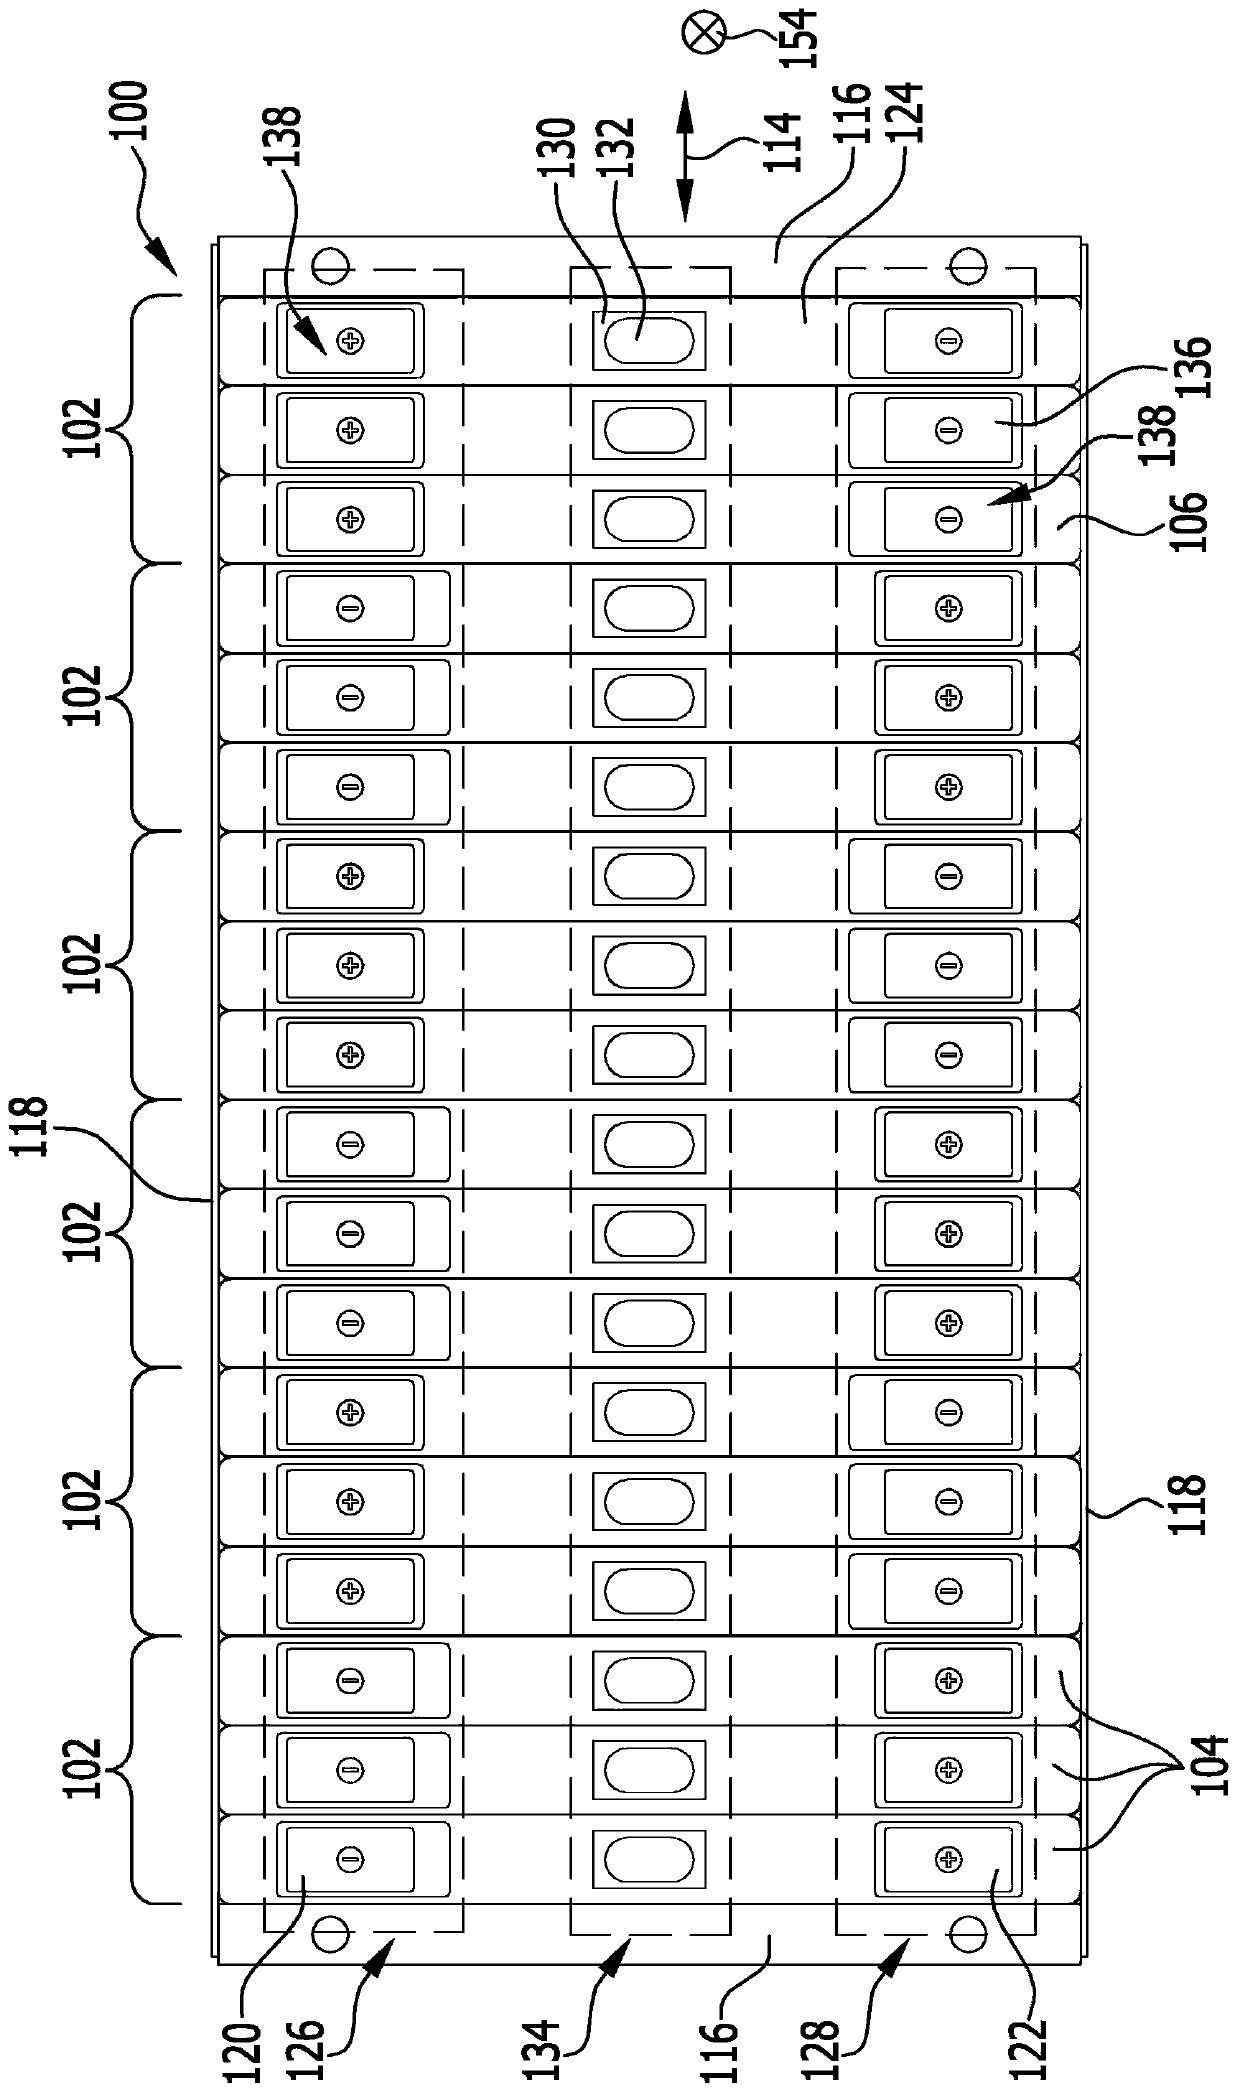 Cell contacting system for an electrochemical device